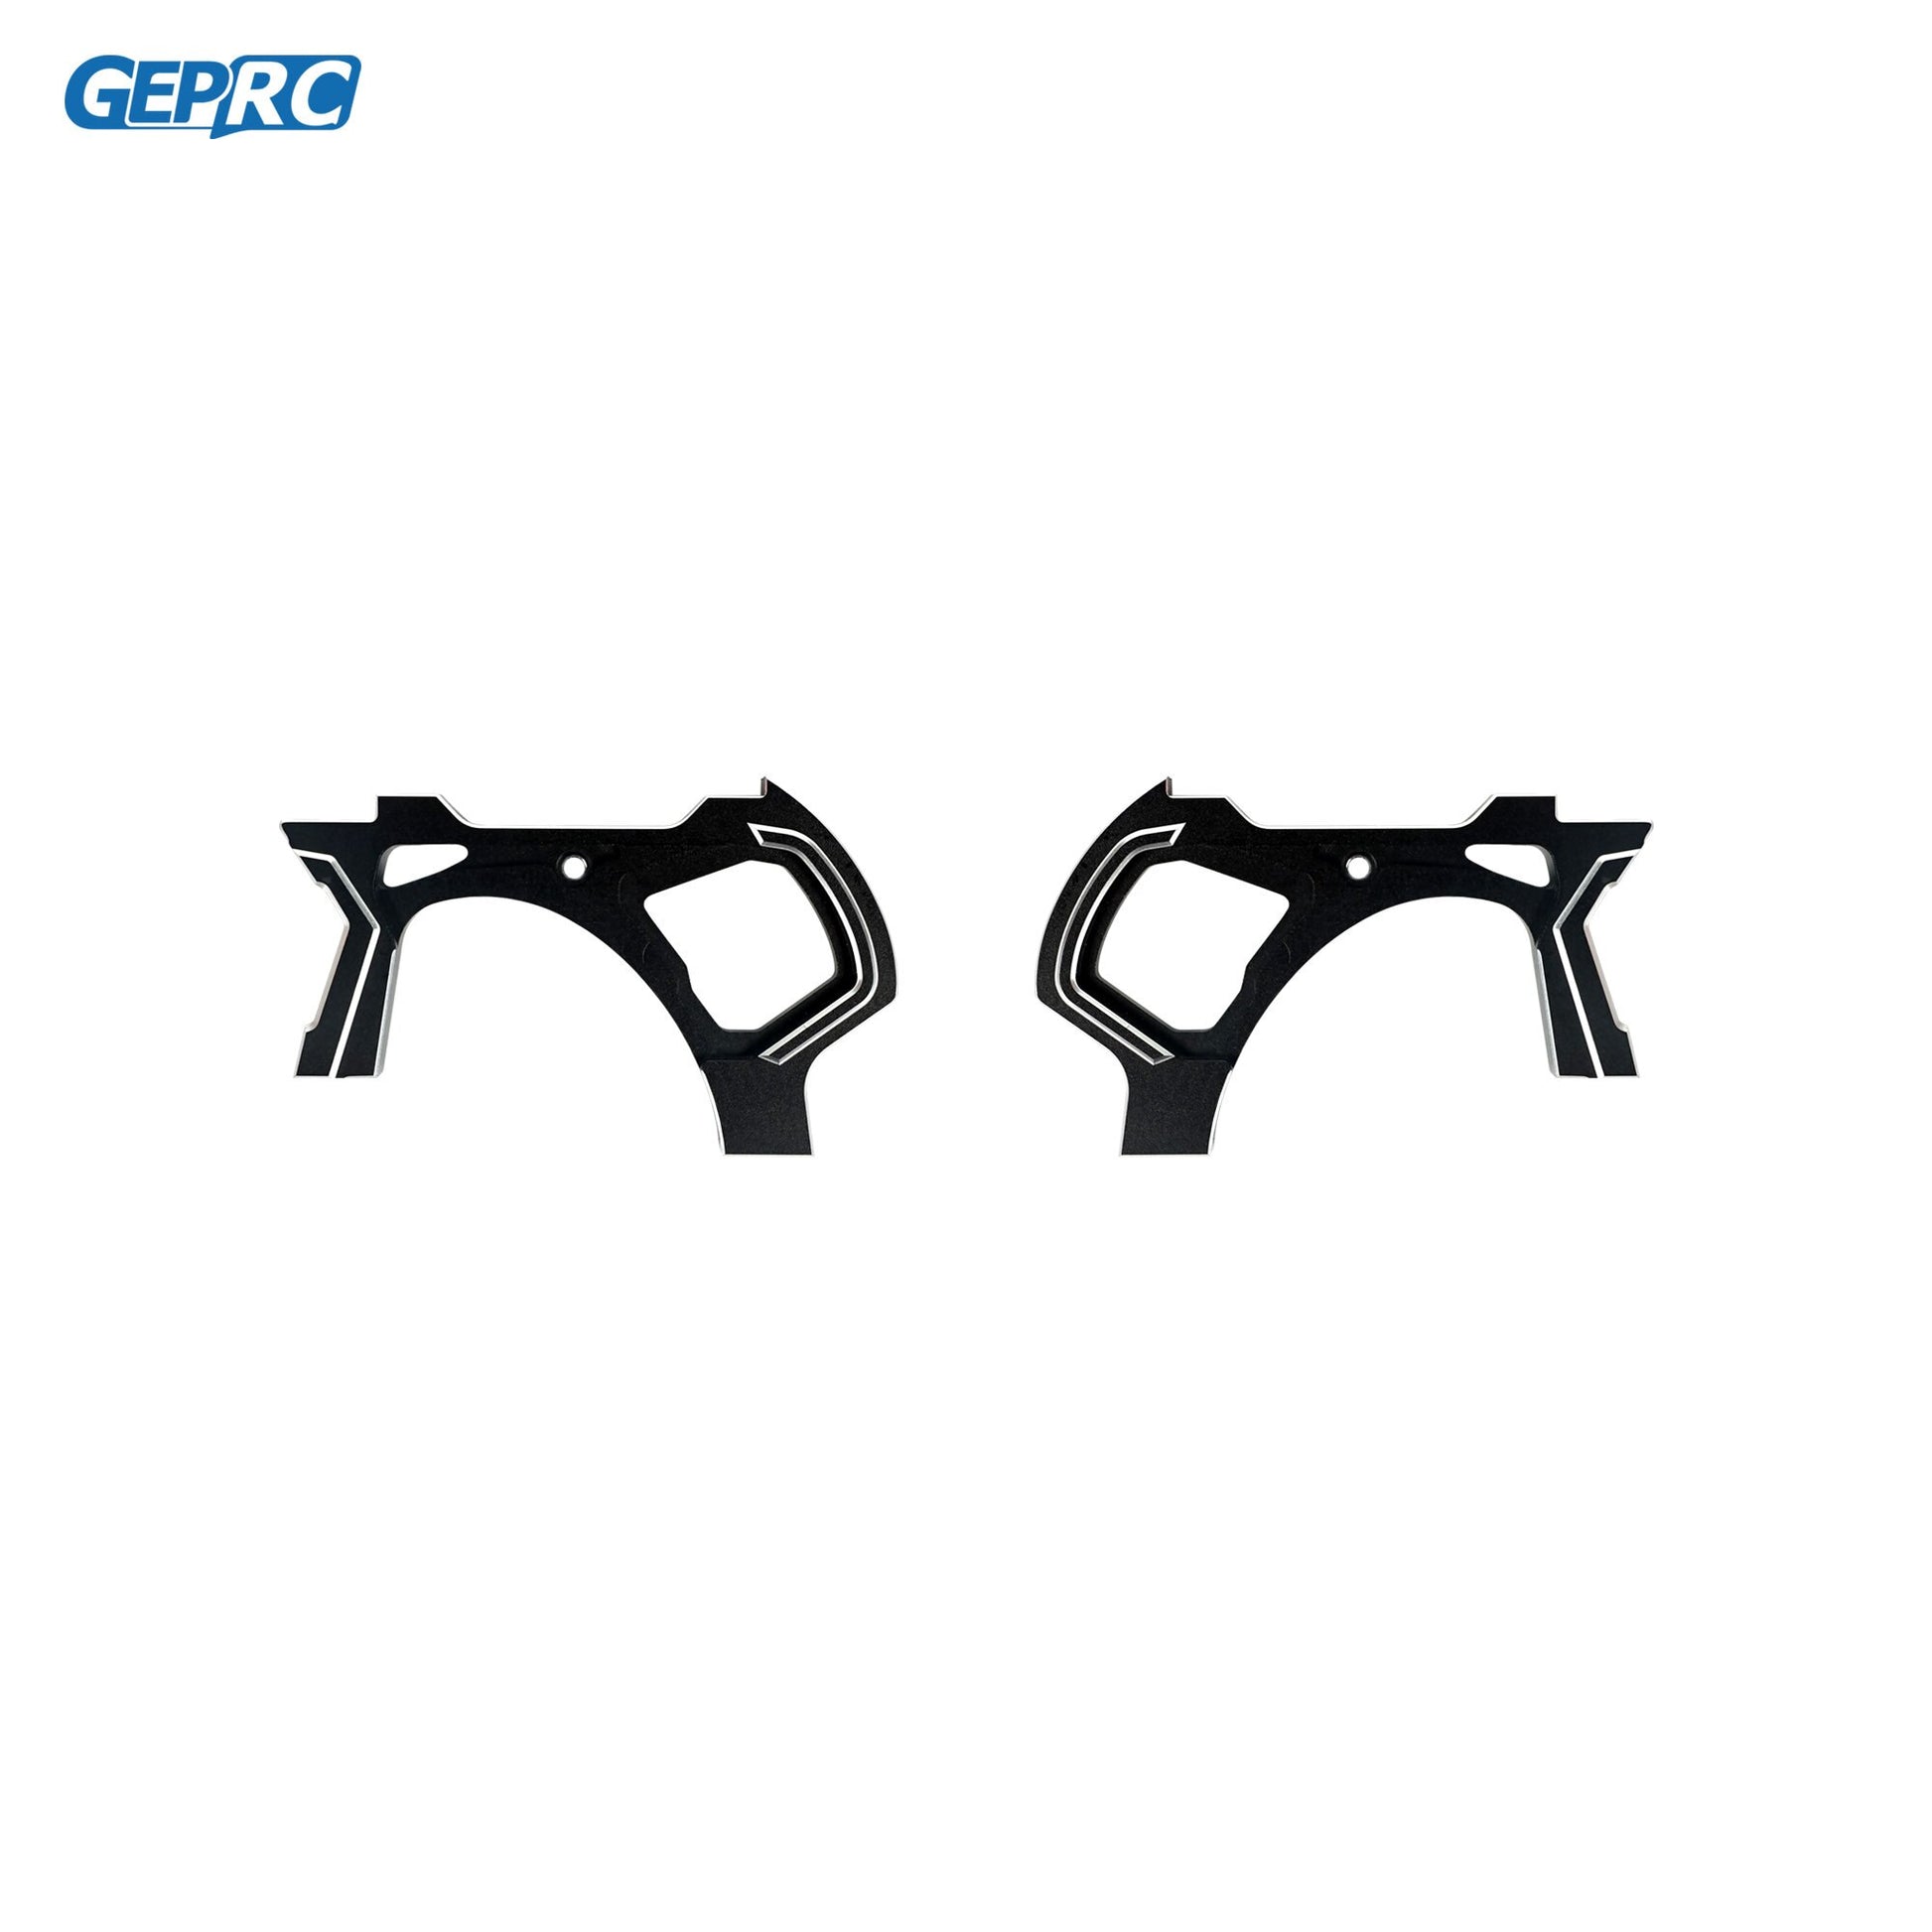 GEPRC GEP-MK5 O3 Frame Parts - Upgrade Package Base Quadcopter Frame FPV Freestyle RC Racing Drone Mark5